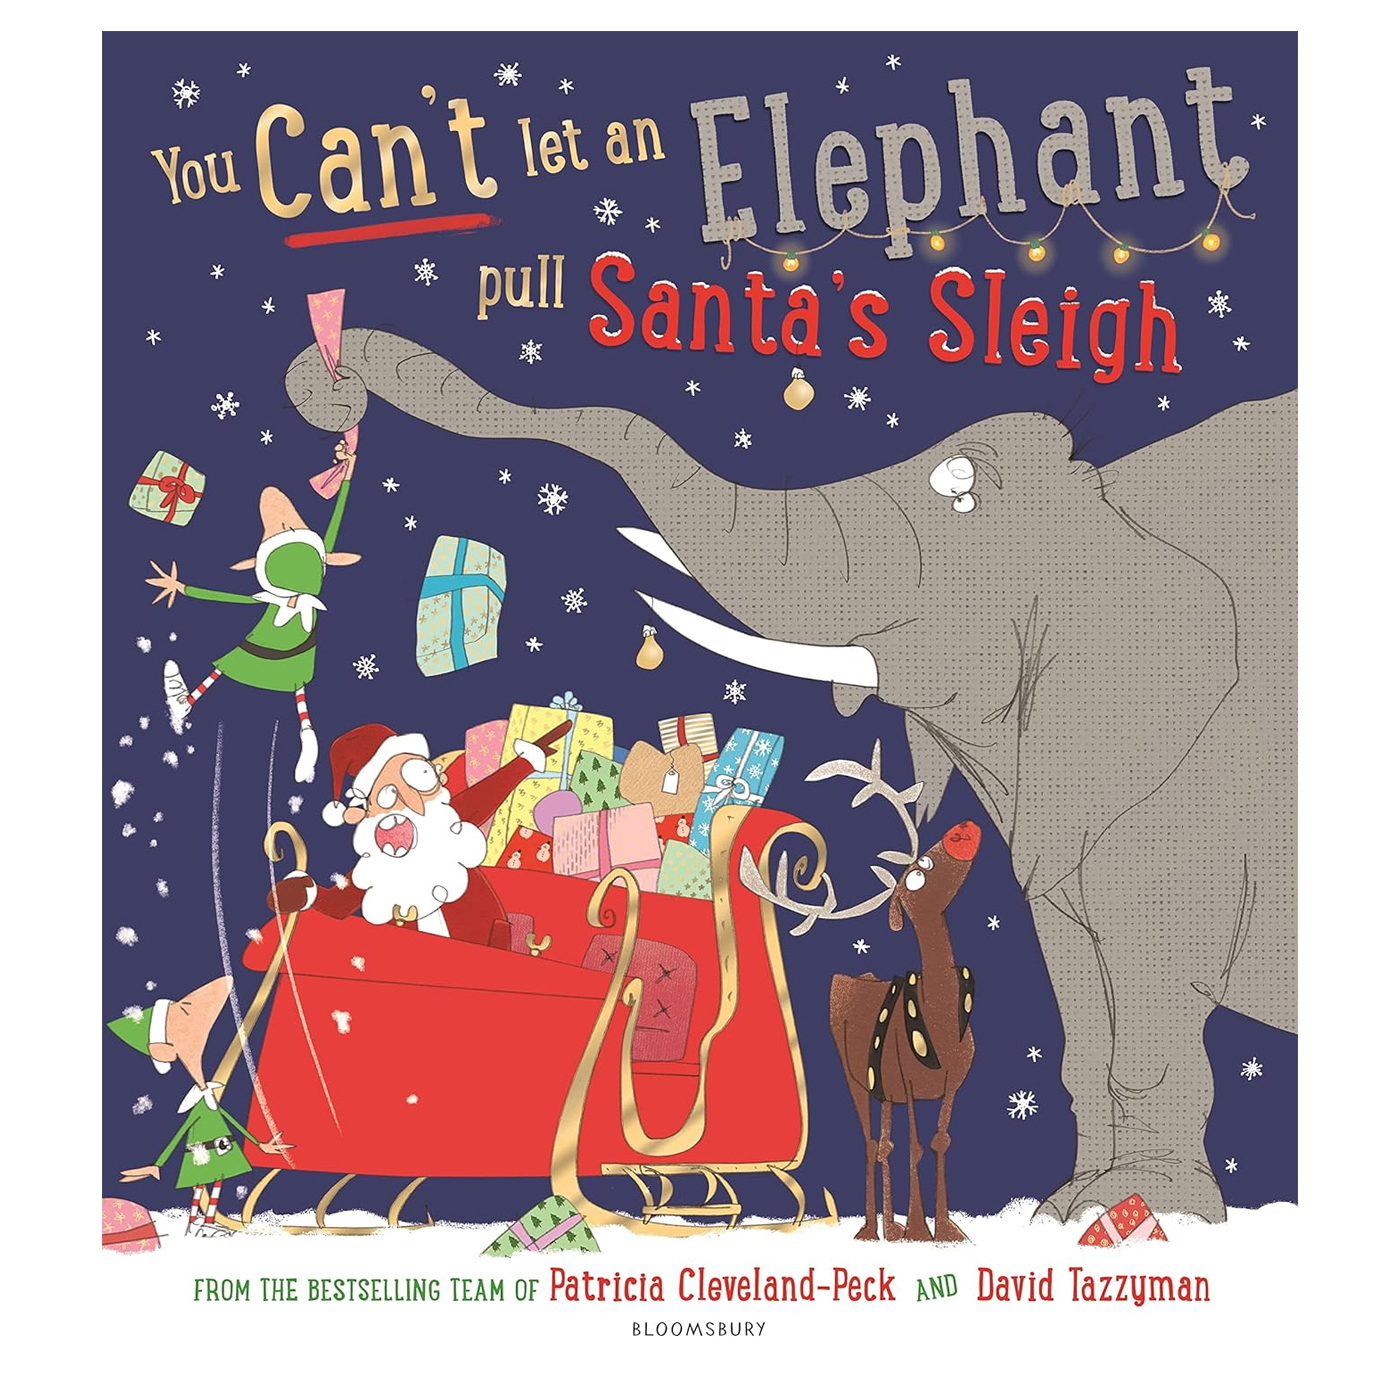  You Can't let an Elephant pull Santa's Sleigh